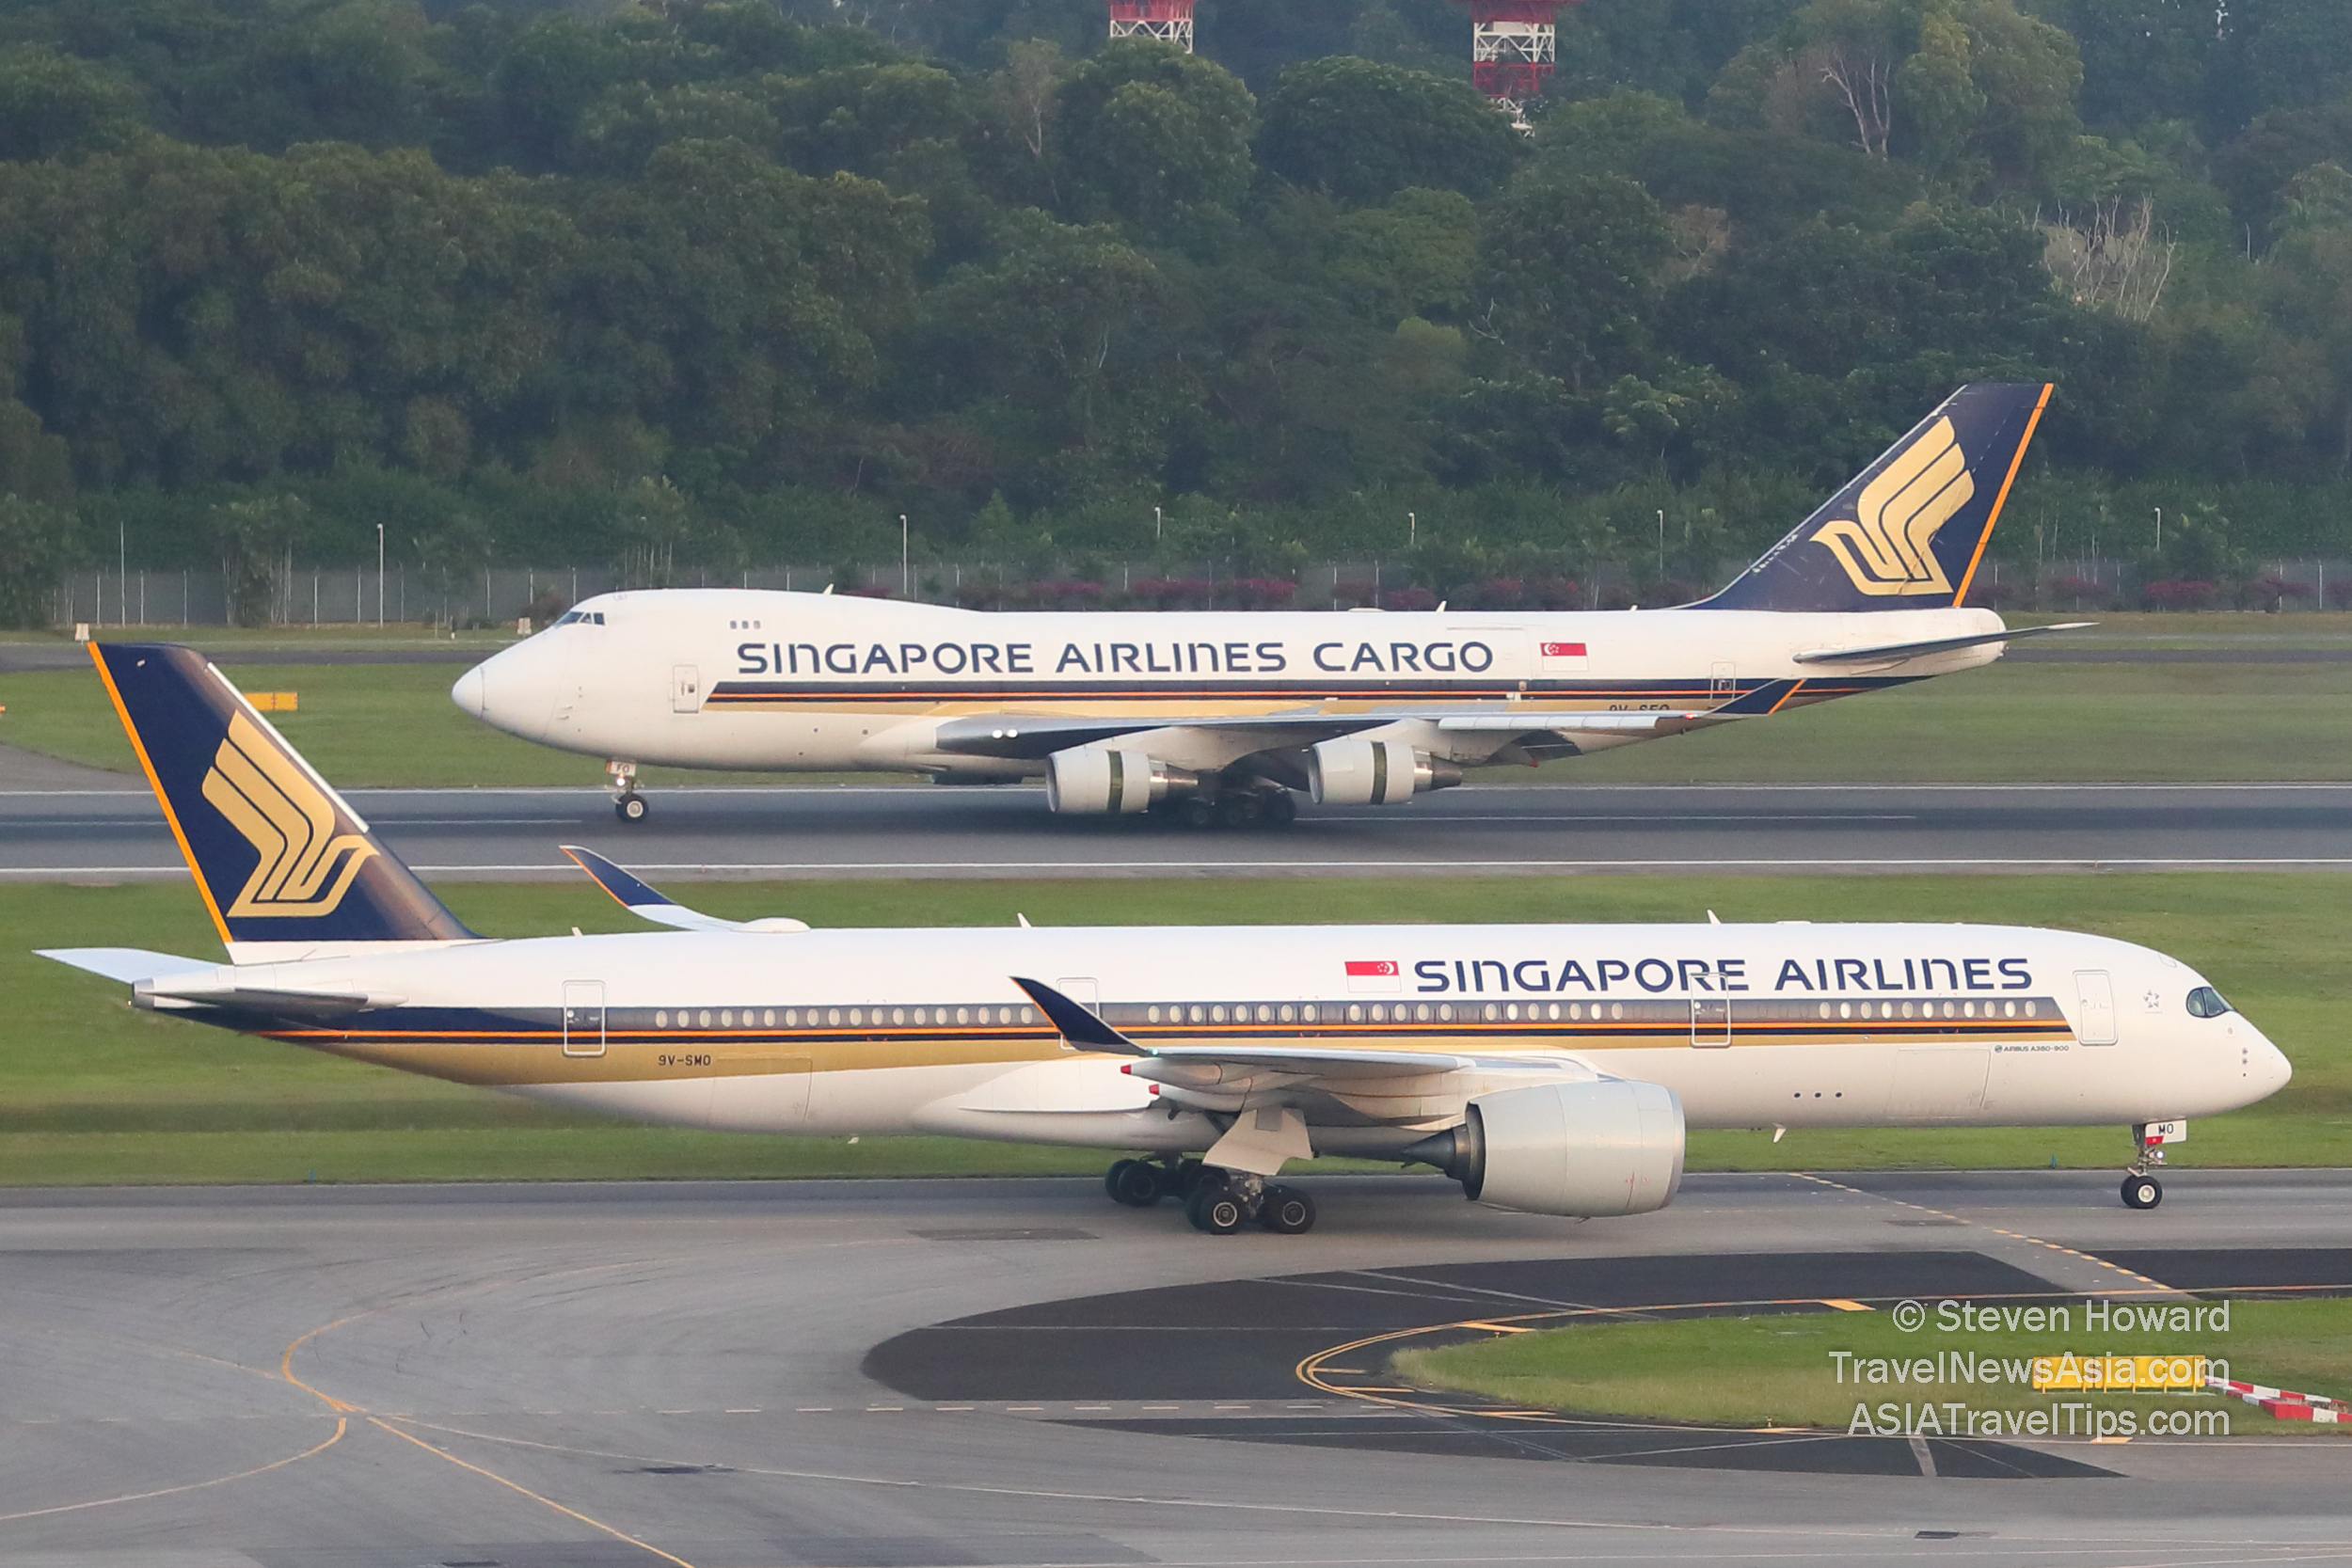 Changi Airport in Singapore is one of the most important aviation hubs, for cargo and passenger traffic, in Asia Pacific. Picture of Singapore Airlines aircraft at Changi by Steven Howard of TravelNewsAsia.com Click to enlarge.